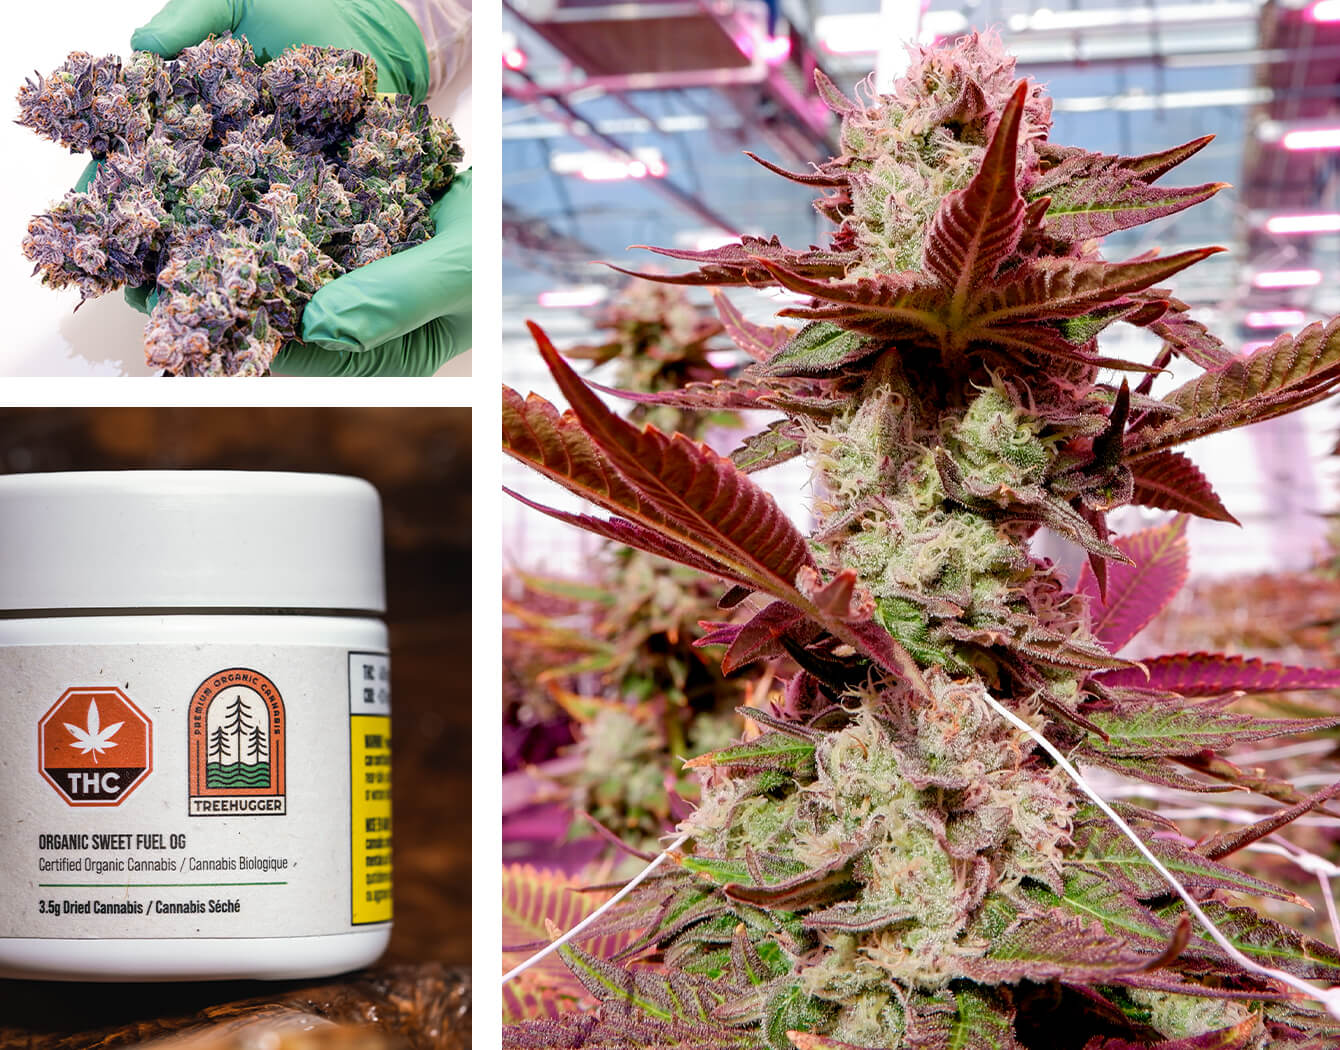 Photo collage of Cannabis Bud, Cannabis Flower and Treehugger packaging